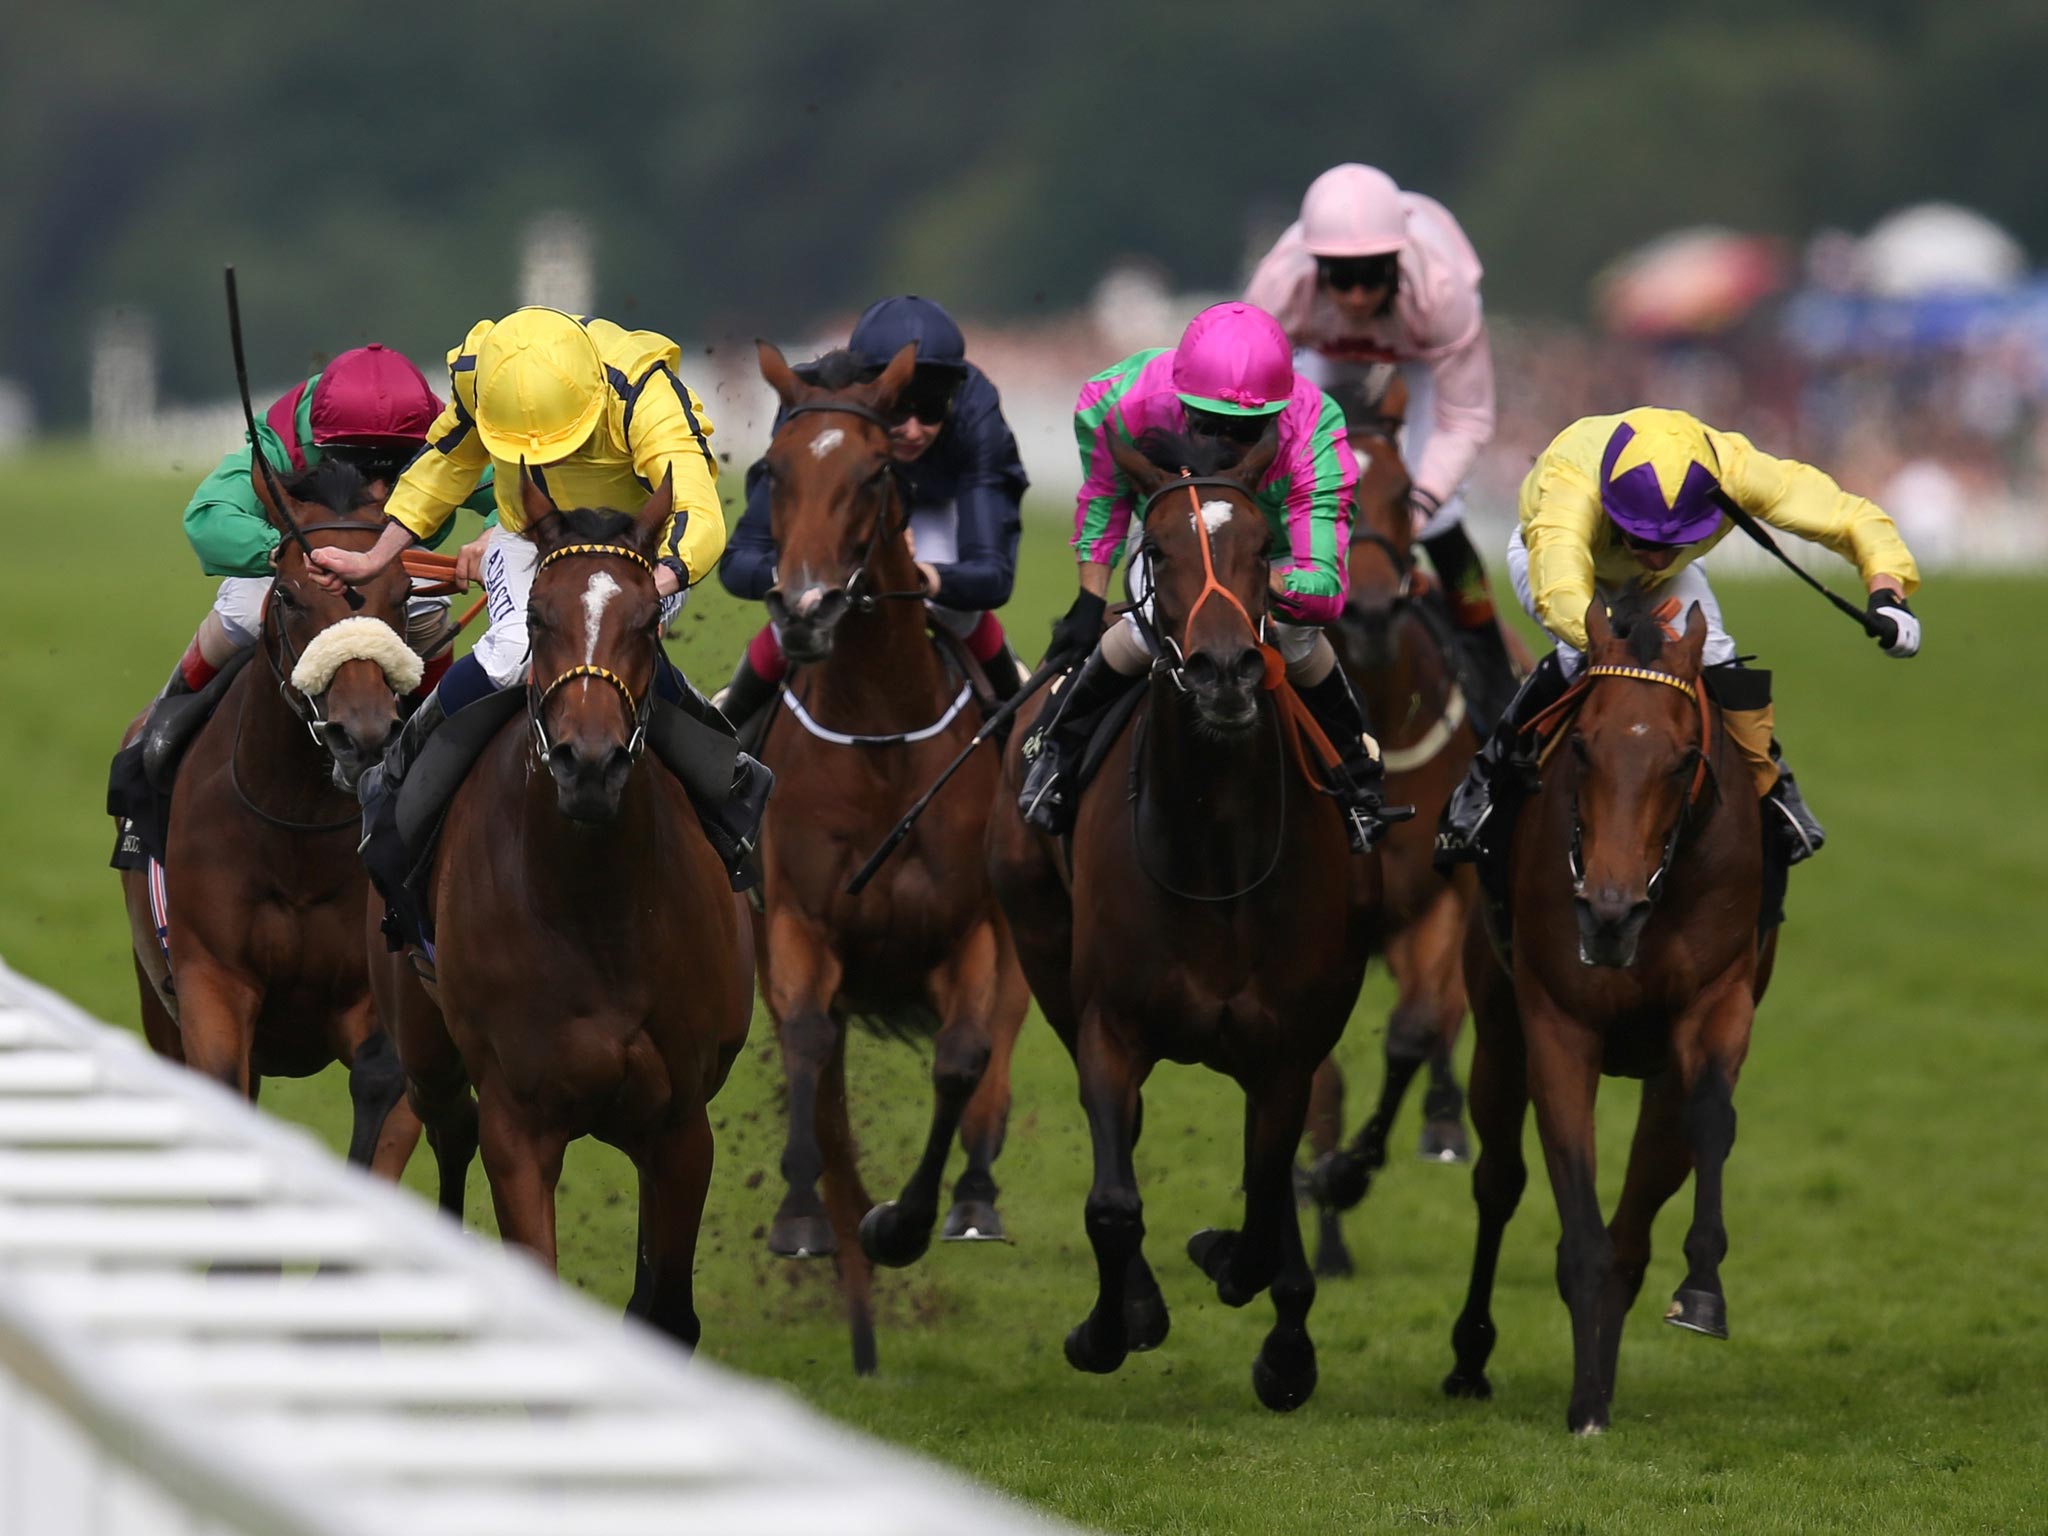 Rizeena, ridden by Ryan Moore (second left), comes up the rail to win the Coronation Stakes at Ascot yesterday